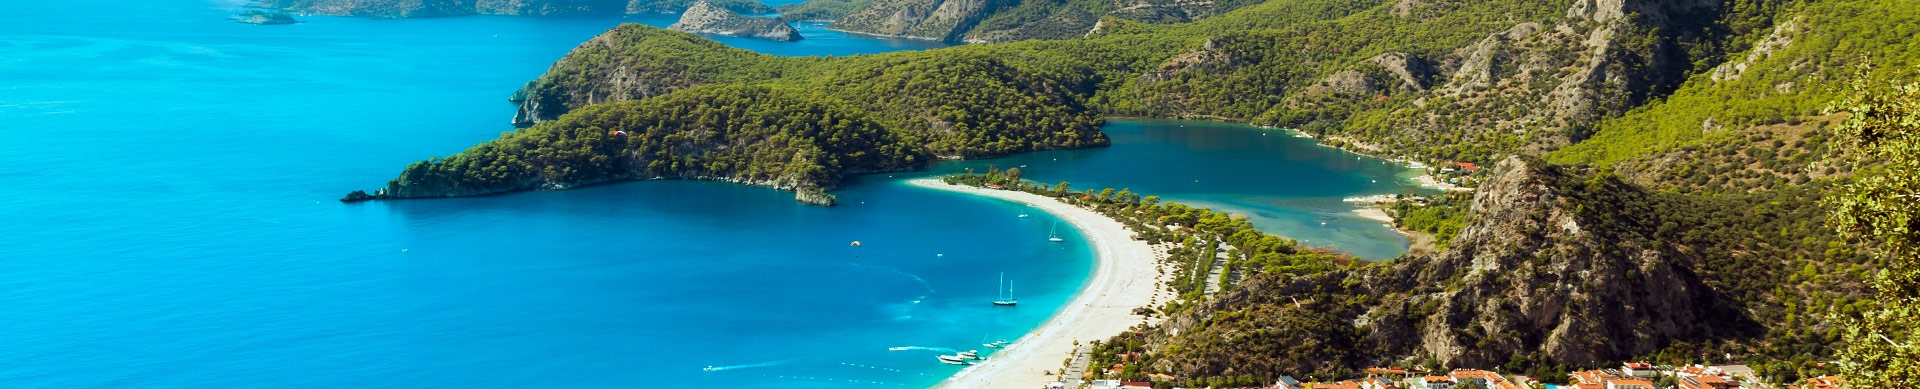 Oludeniz airport taxi transfer from-to airport, holiday hotel transport, Antalya airport vacation travel Turkey